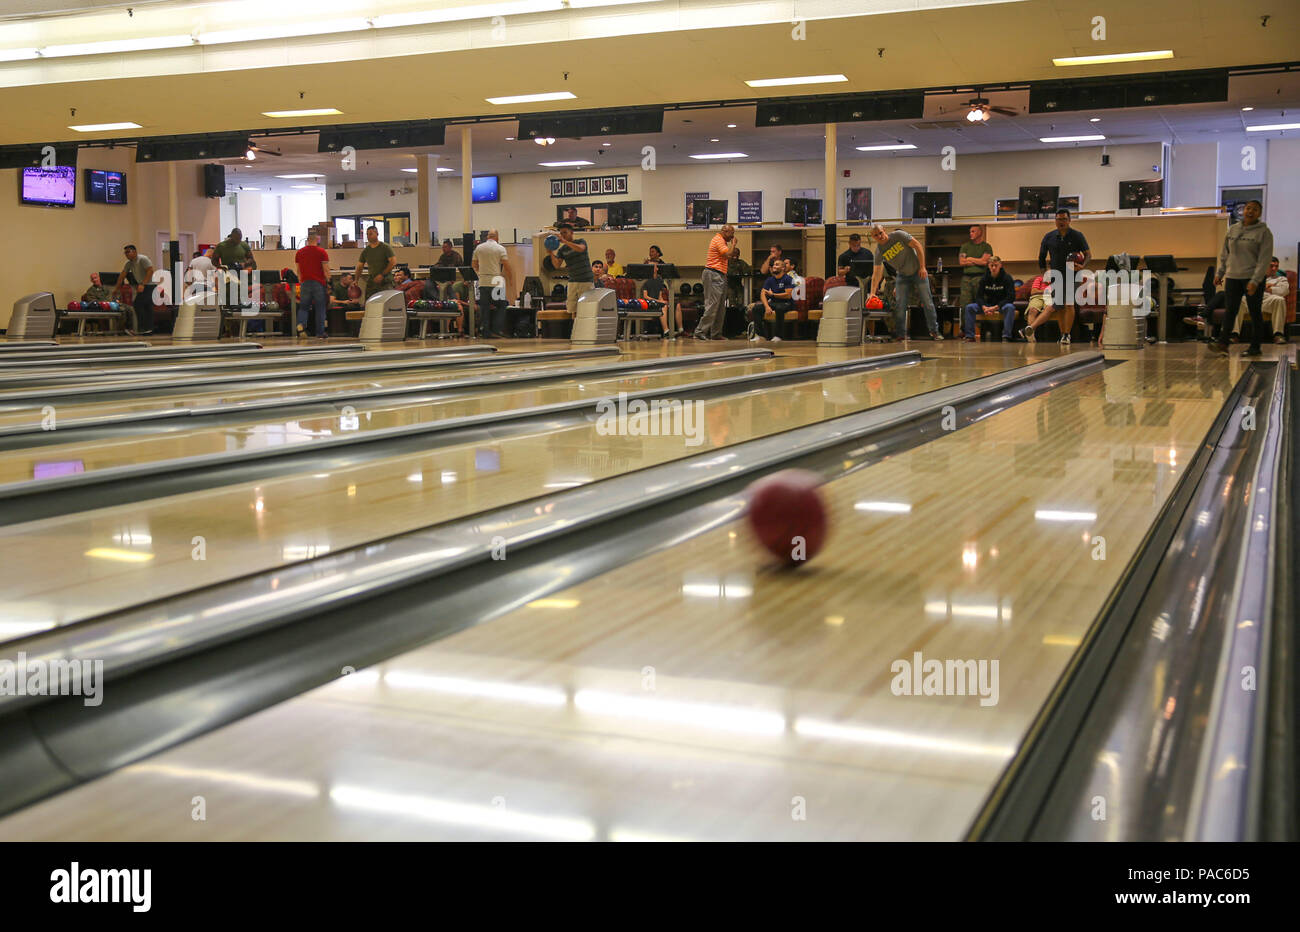 Participants in the Commanding General’s Cup Scratch Bowling Tournament compete against each other at the recreation center on Marine Corps Recruit Depot San Diego, March 8. Each participant played three games, and their scores were added up to see who achieved the highest scores at the end of the tournament. Stock Photo